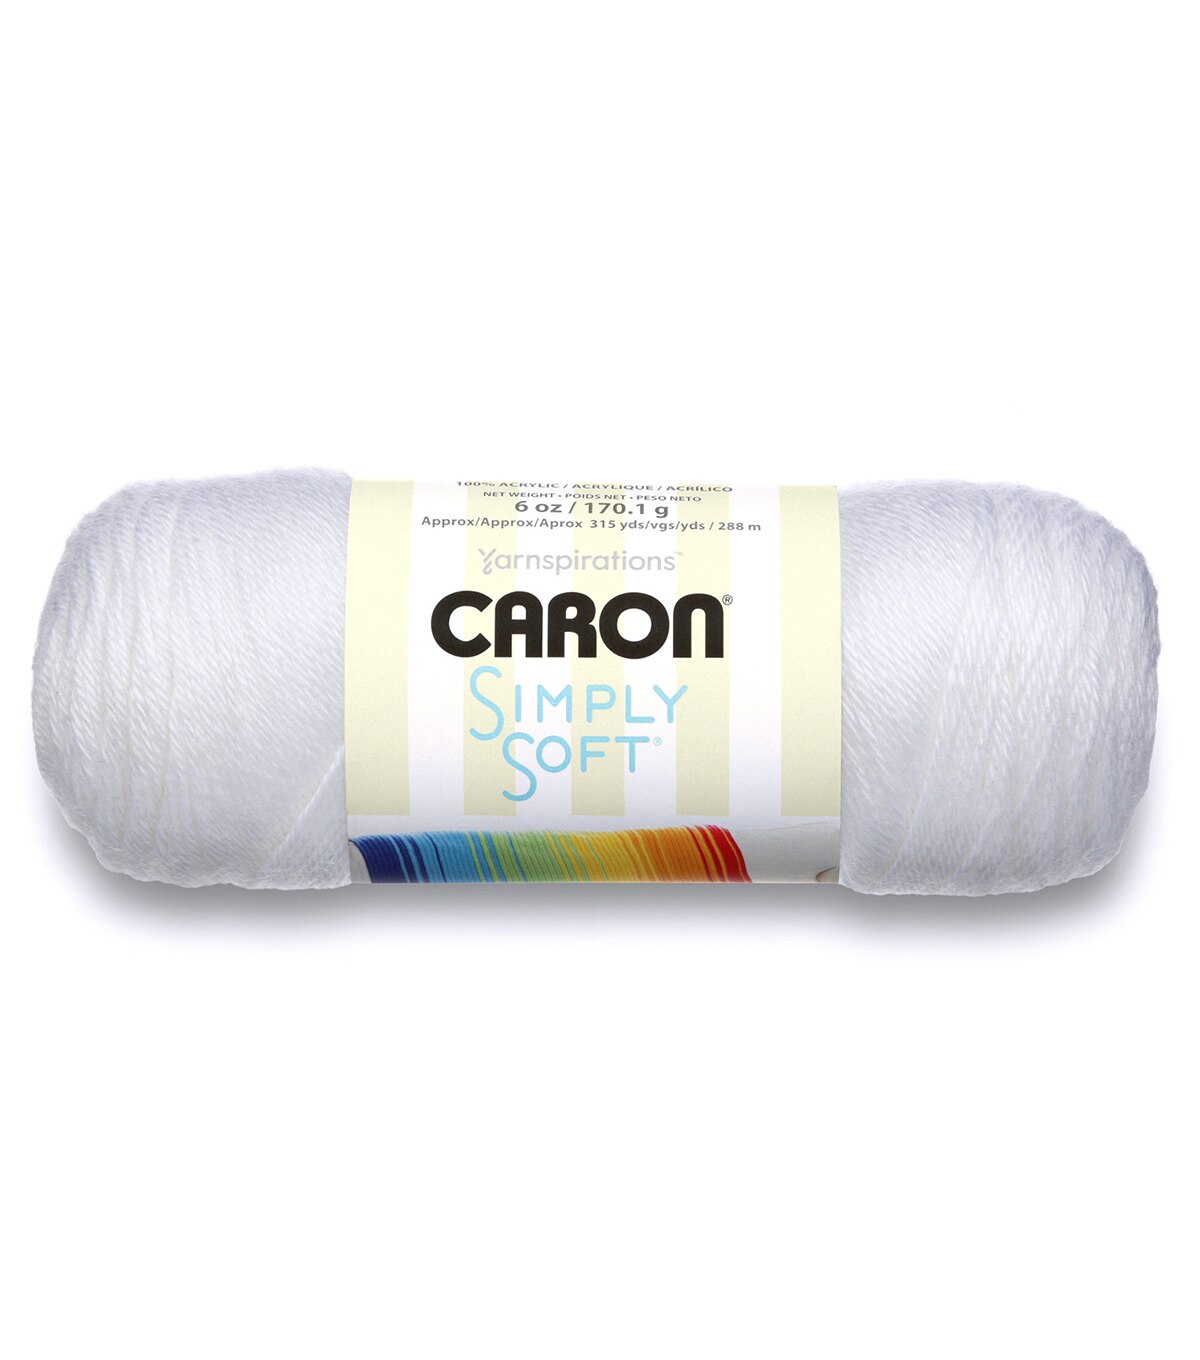 Lion Brand - Shop by Product Line - Other Product Lines - Discontinued  Product Lines - Page 1 - Yarn Canada .ca